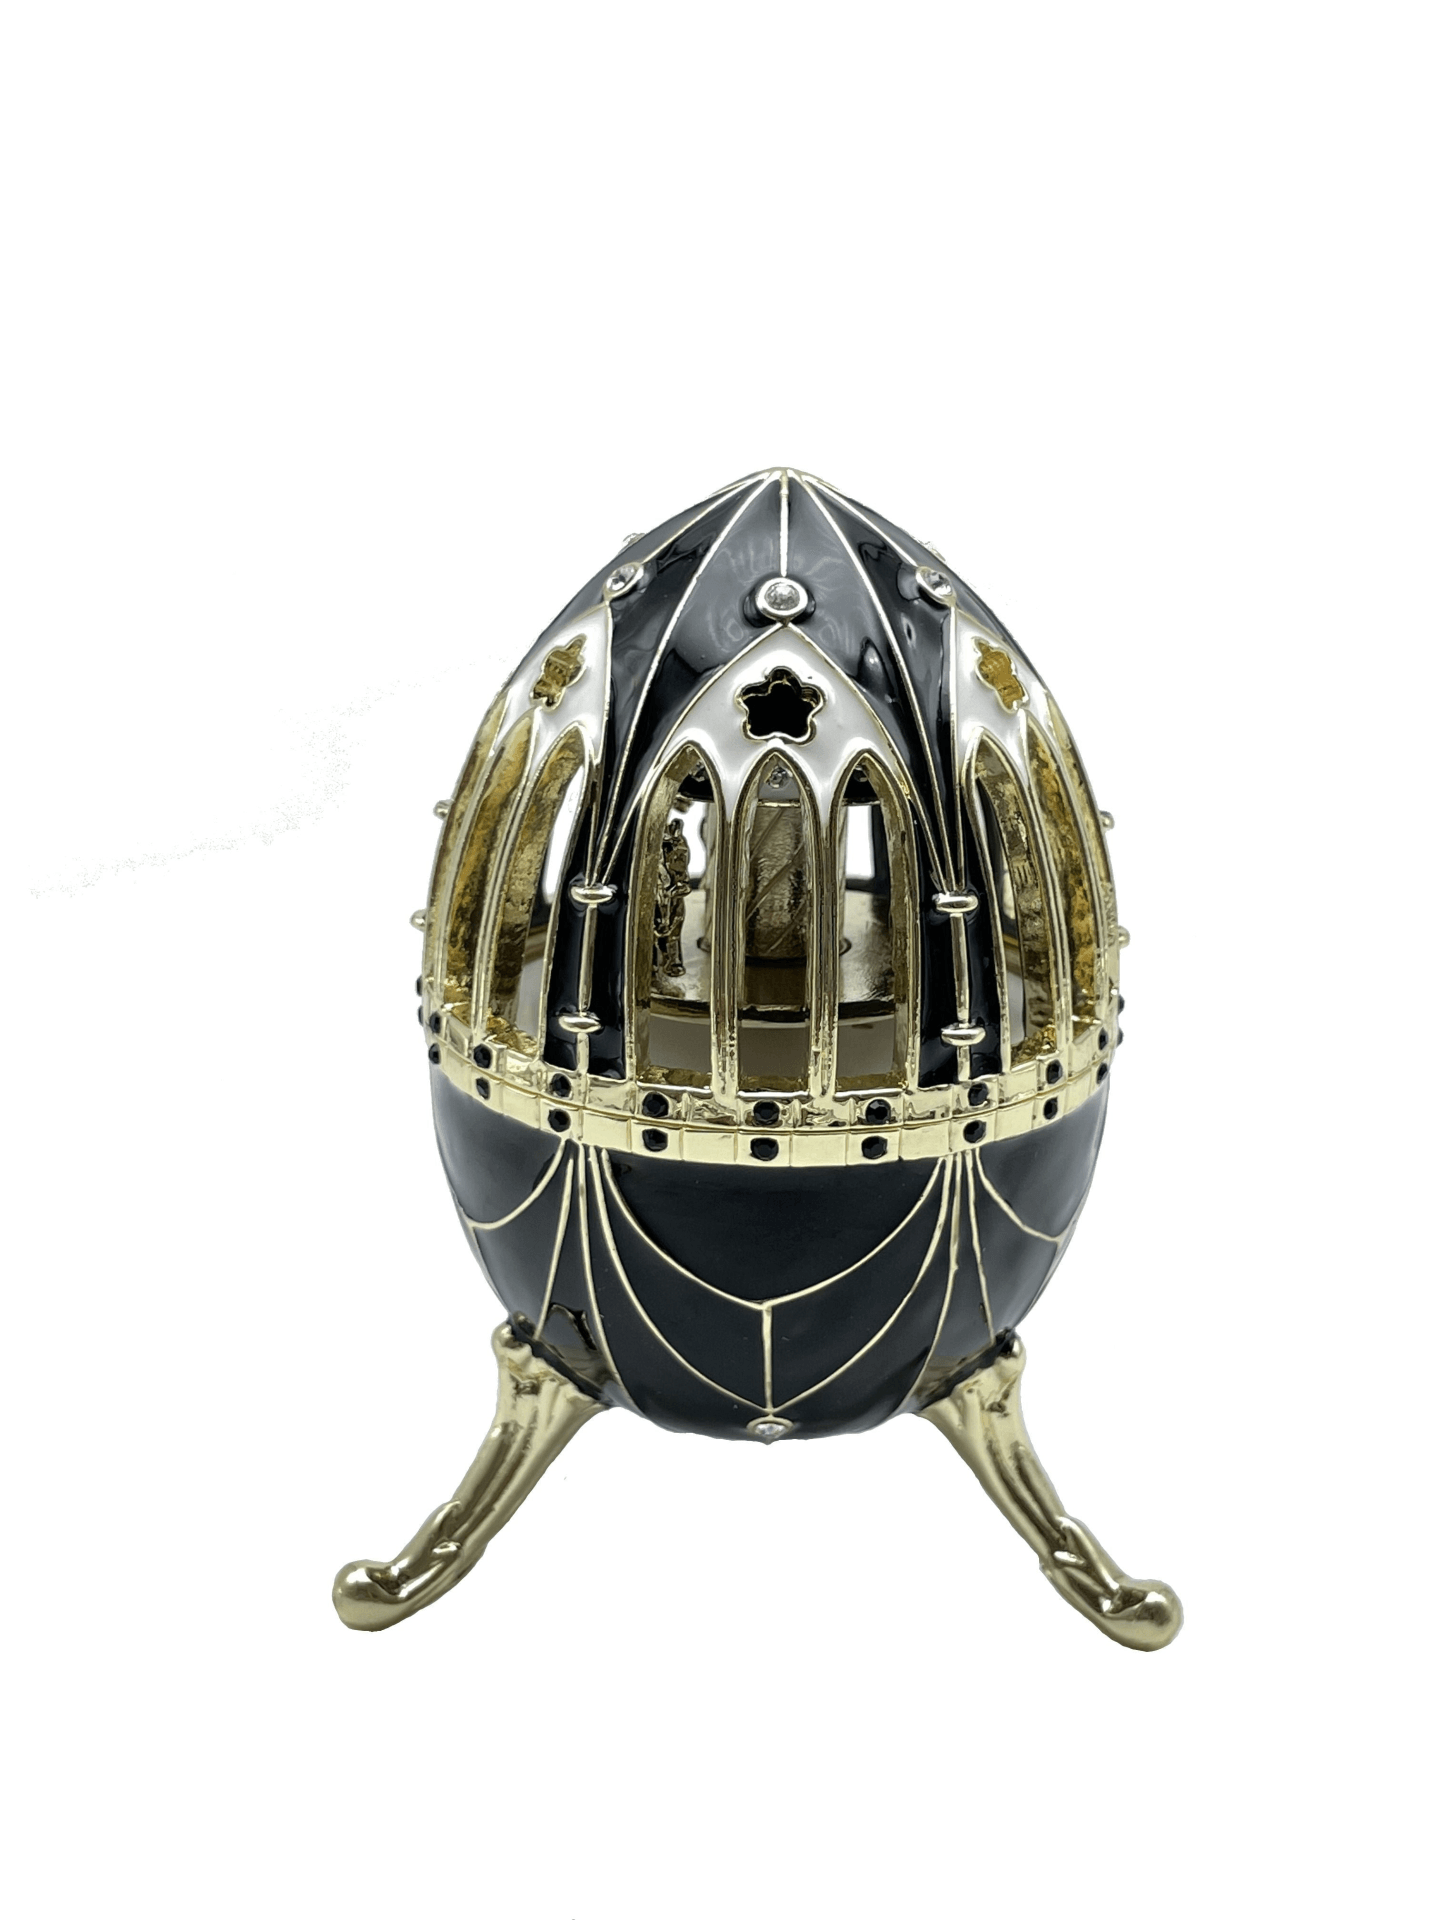 Black and Gold Faberge Egg with Horse Carousel Surprise Inside  